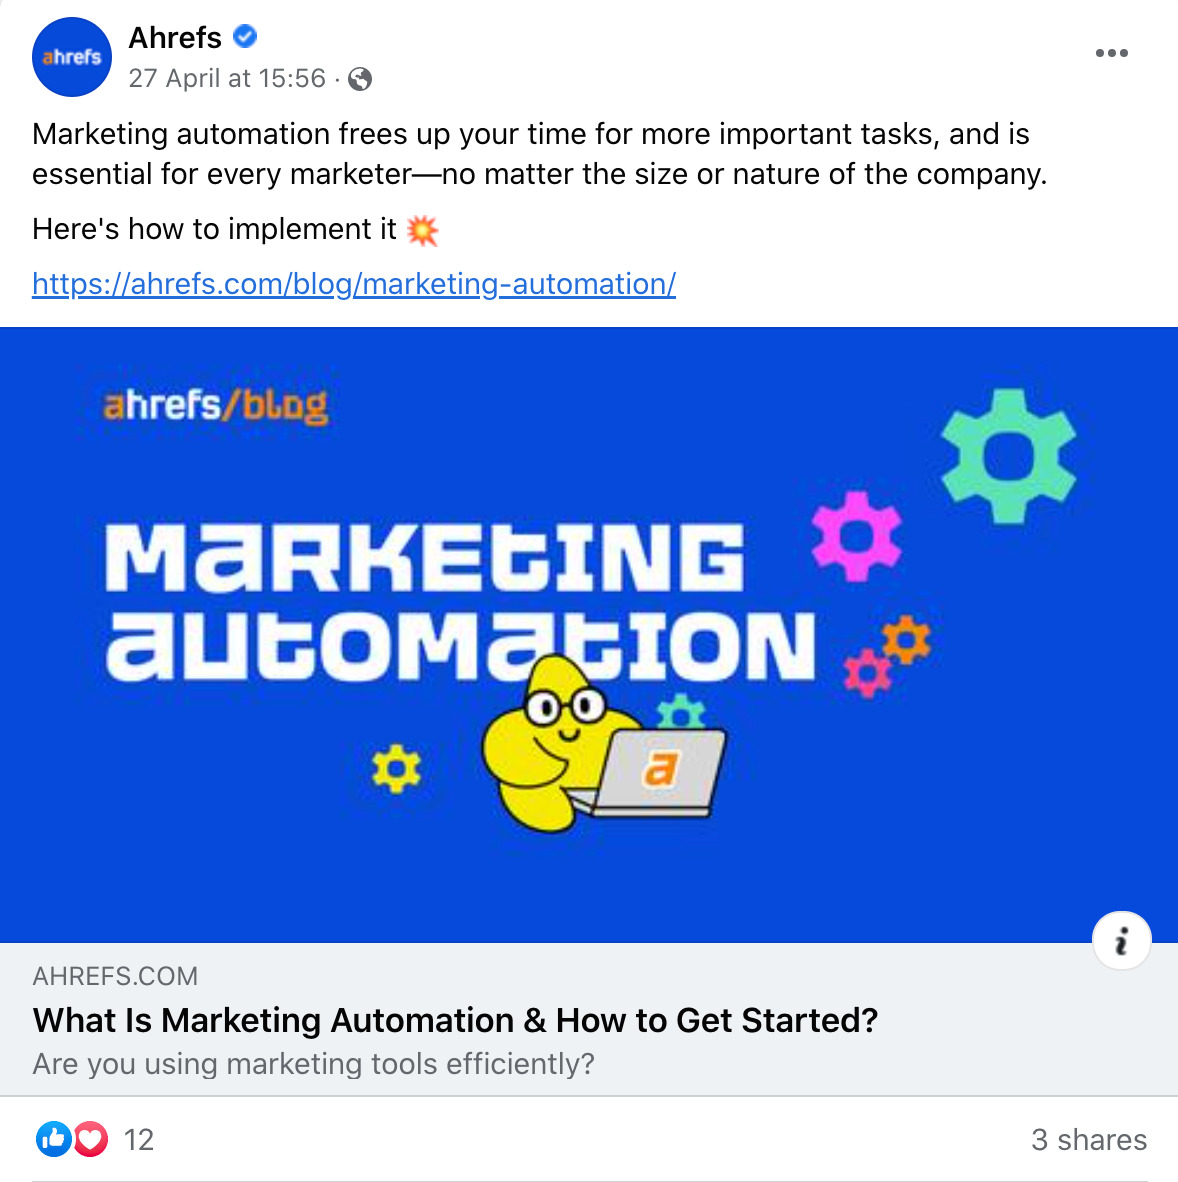 Ahrefs' Facebook post of a blog article about marketing automation